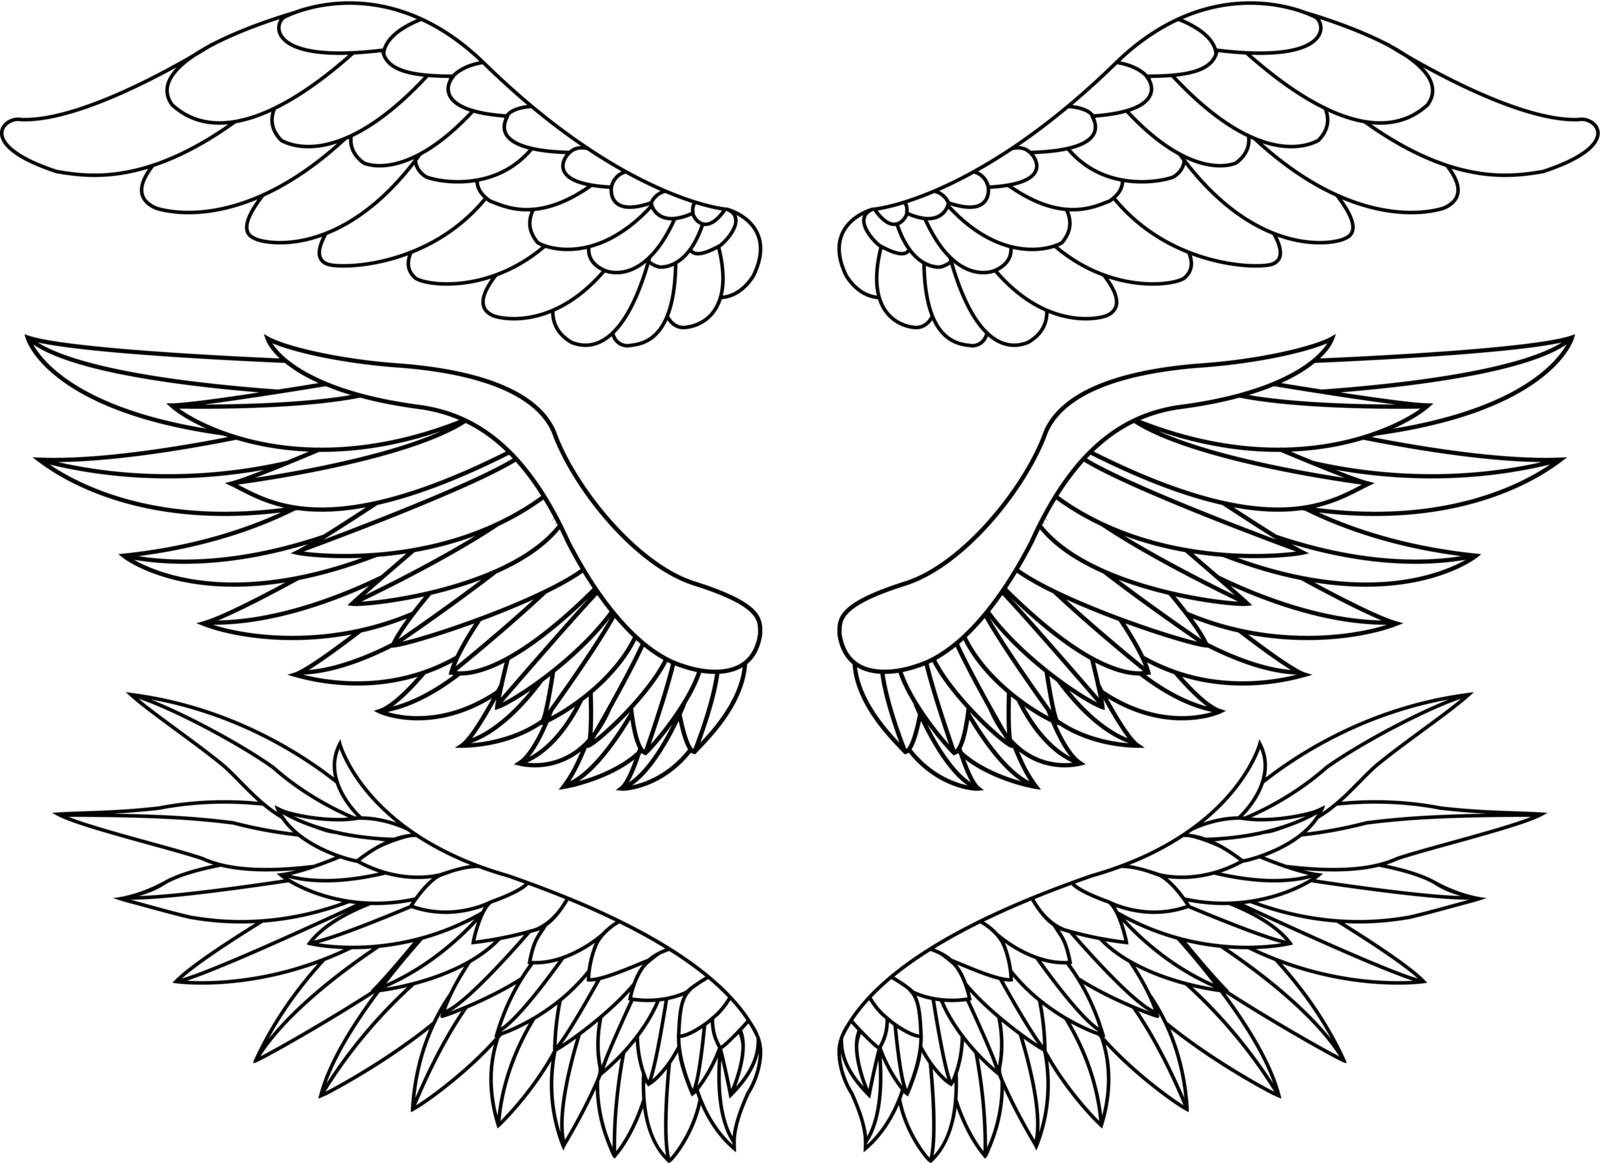 vector illustration of Wings